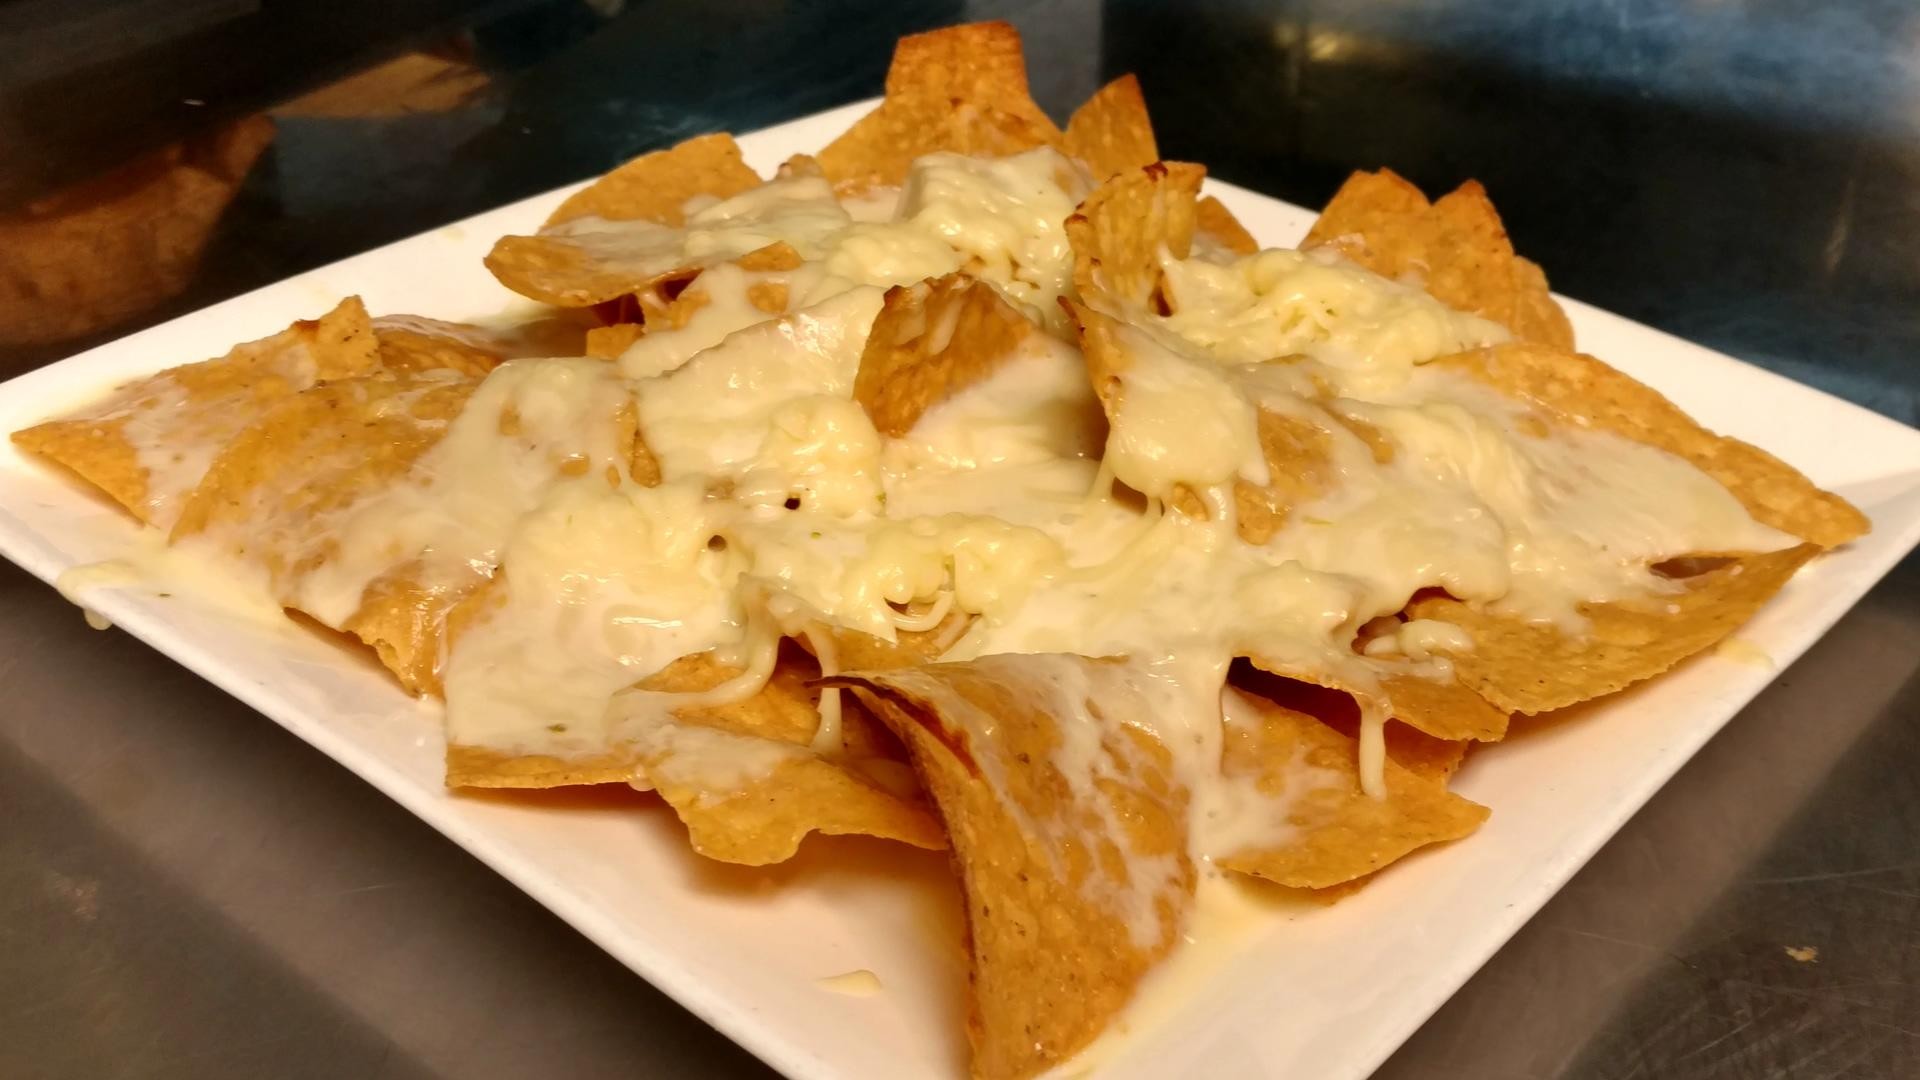 76. Nachos with Cheese